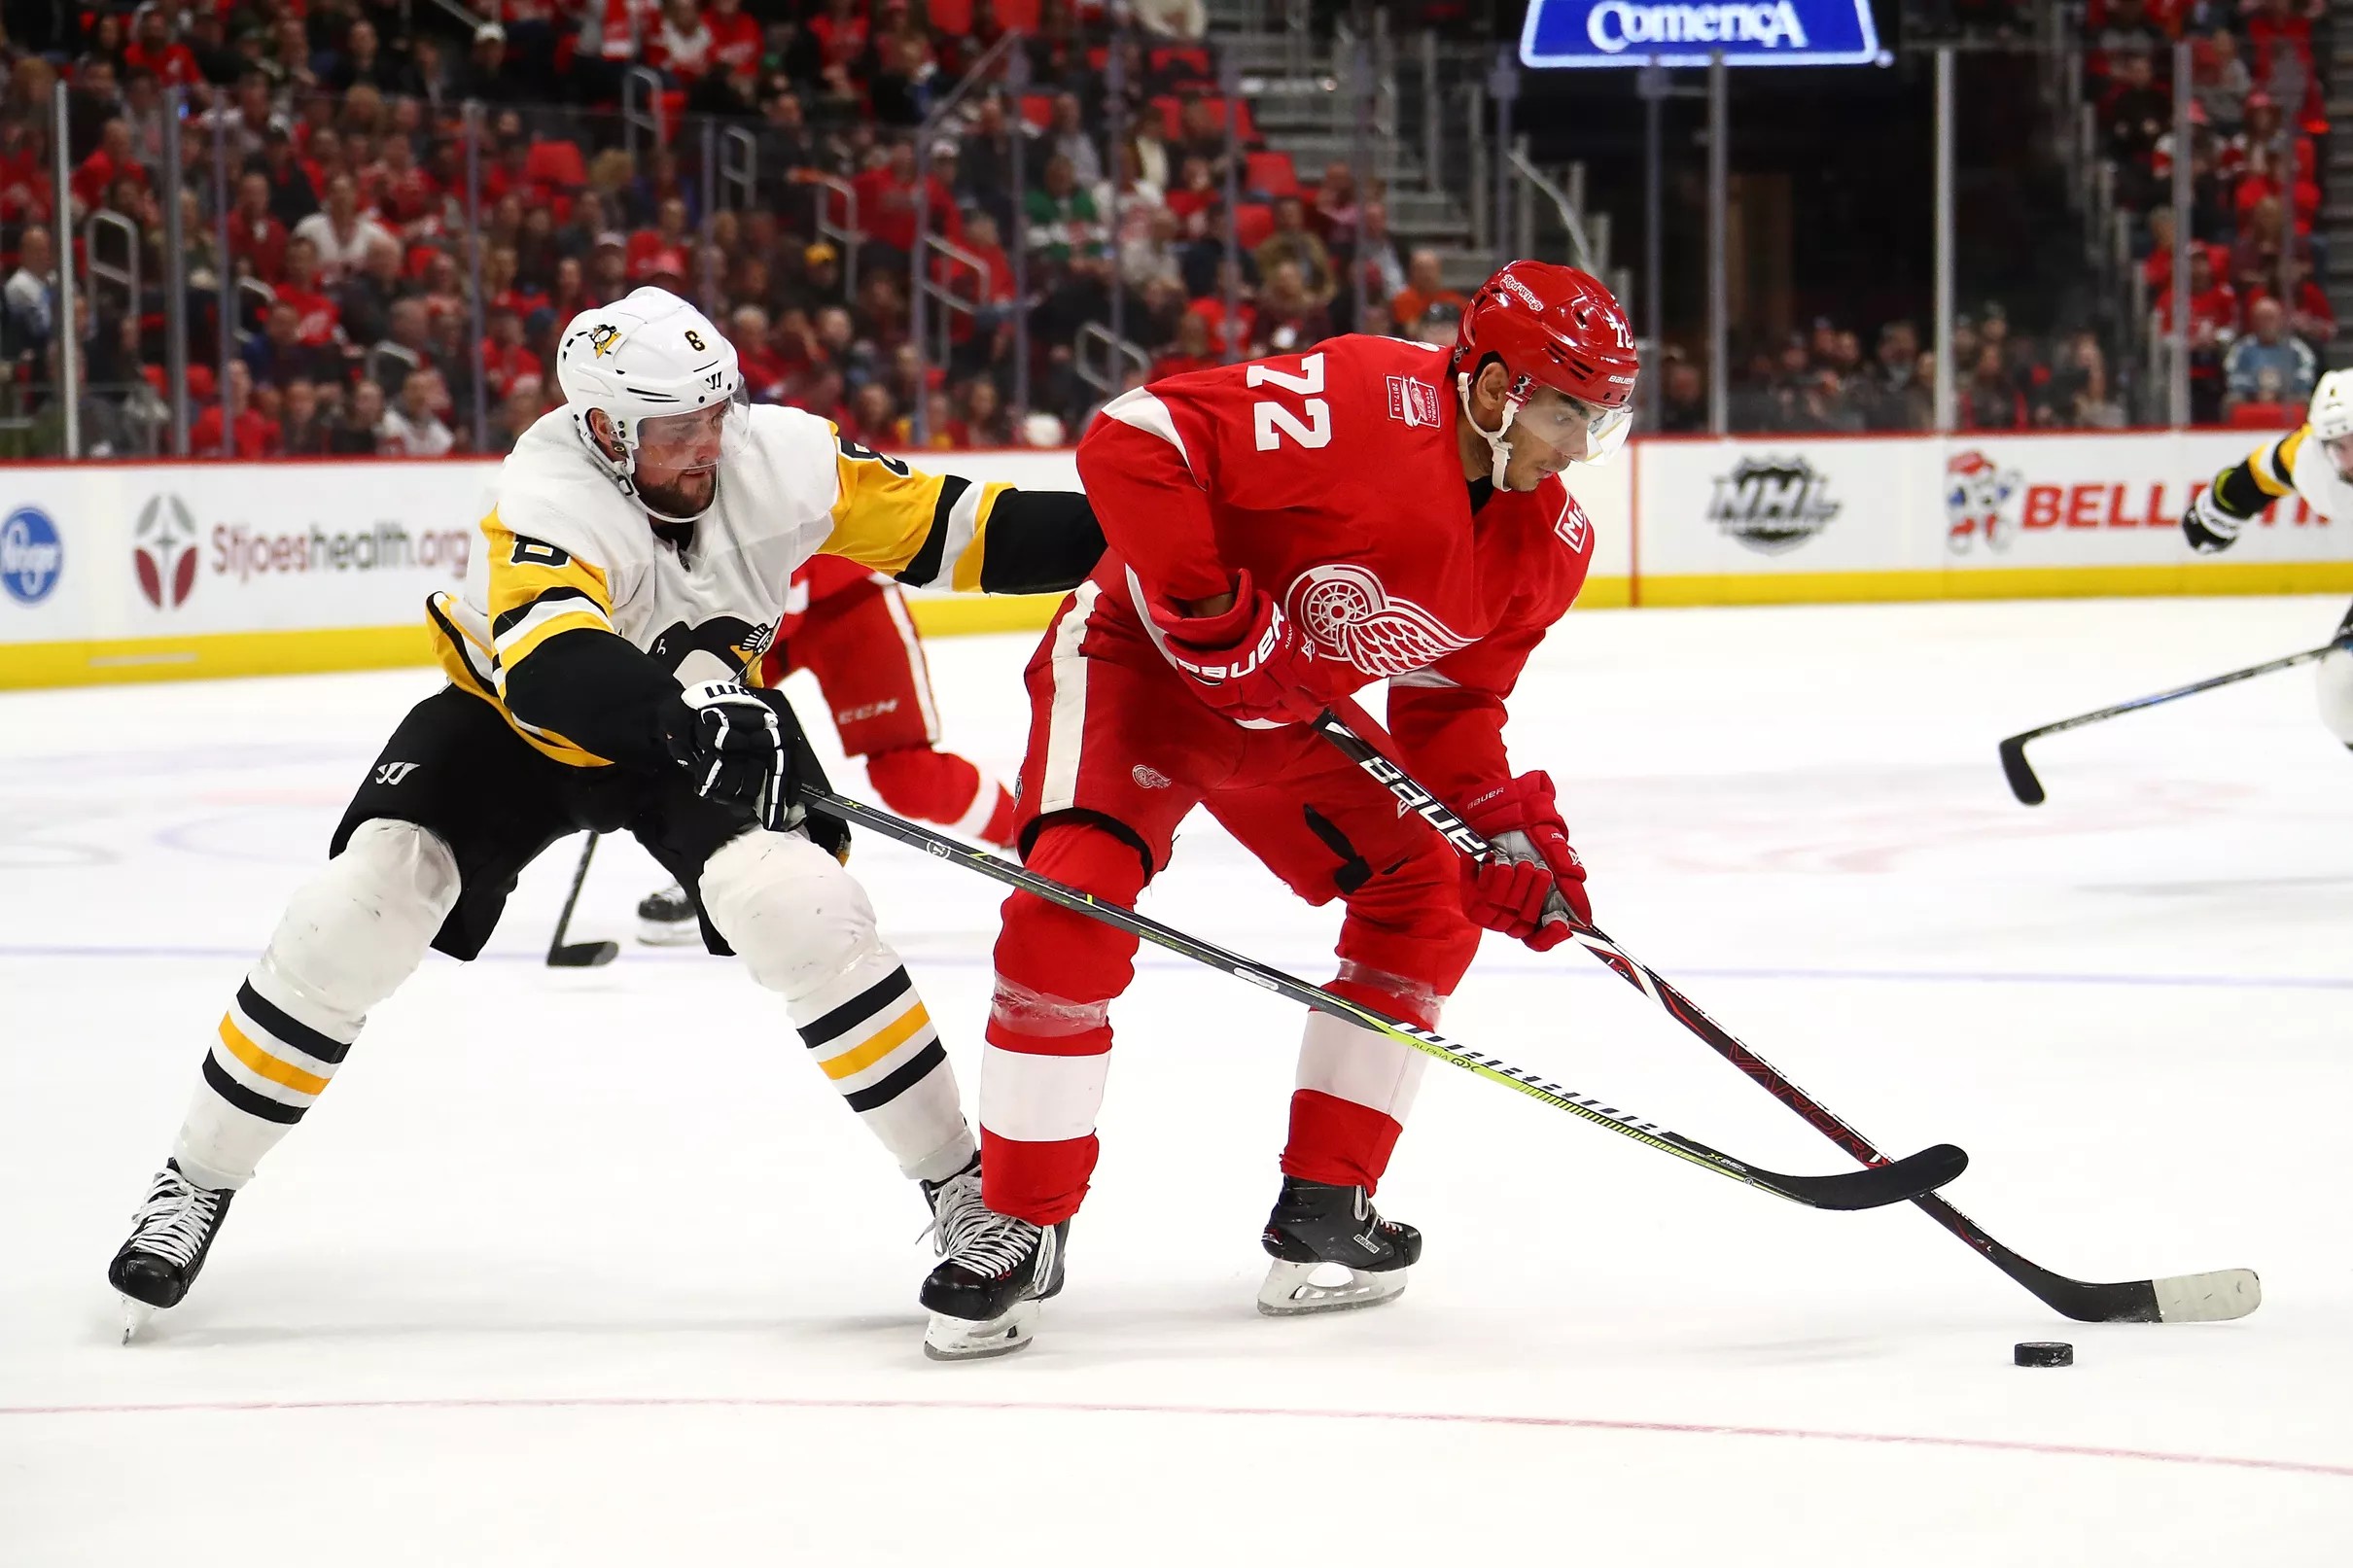 Penguins vs. Red Wings: Pittsburgh lineup and preview